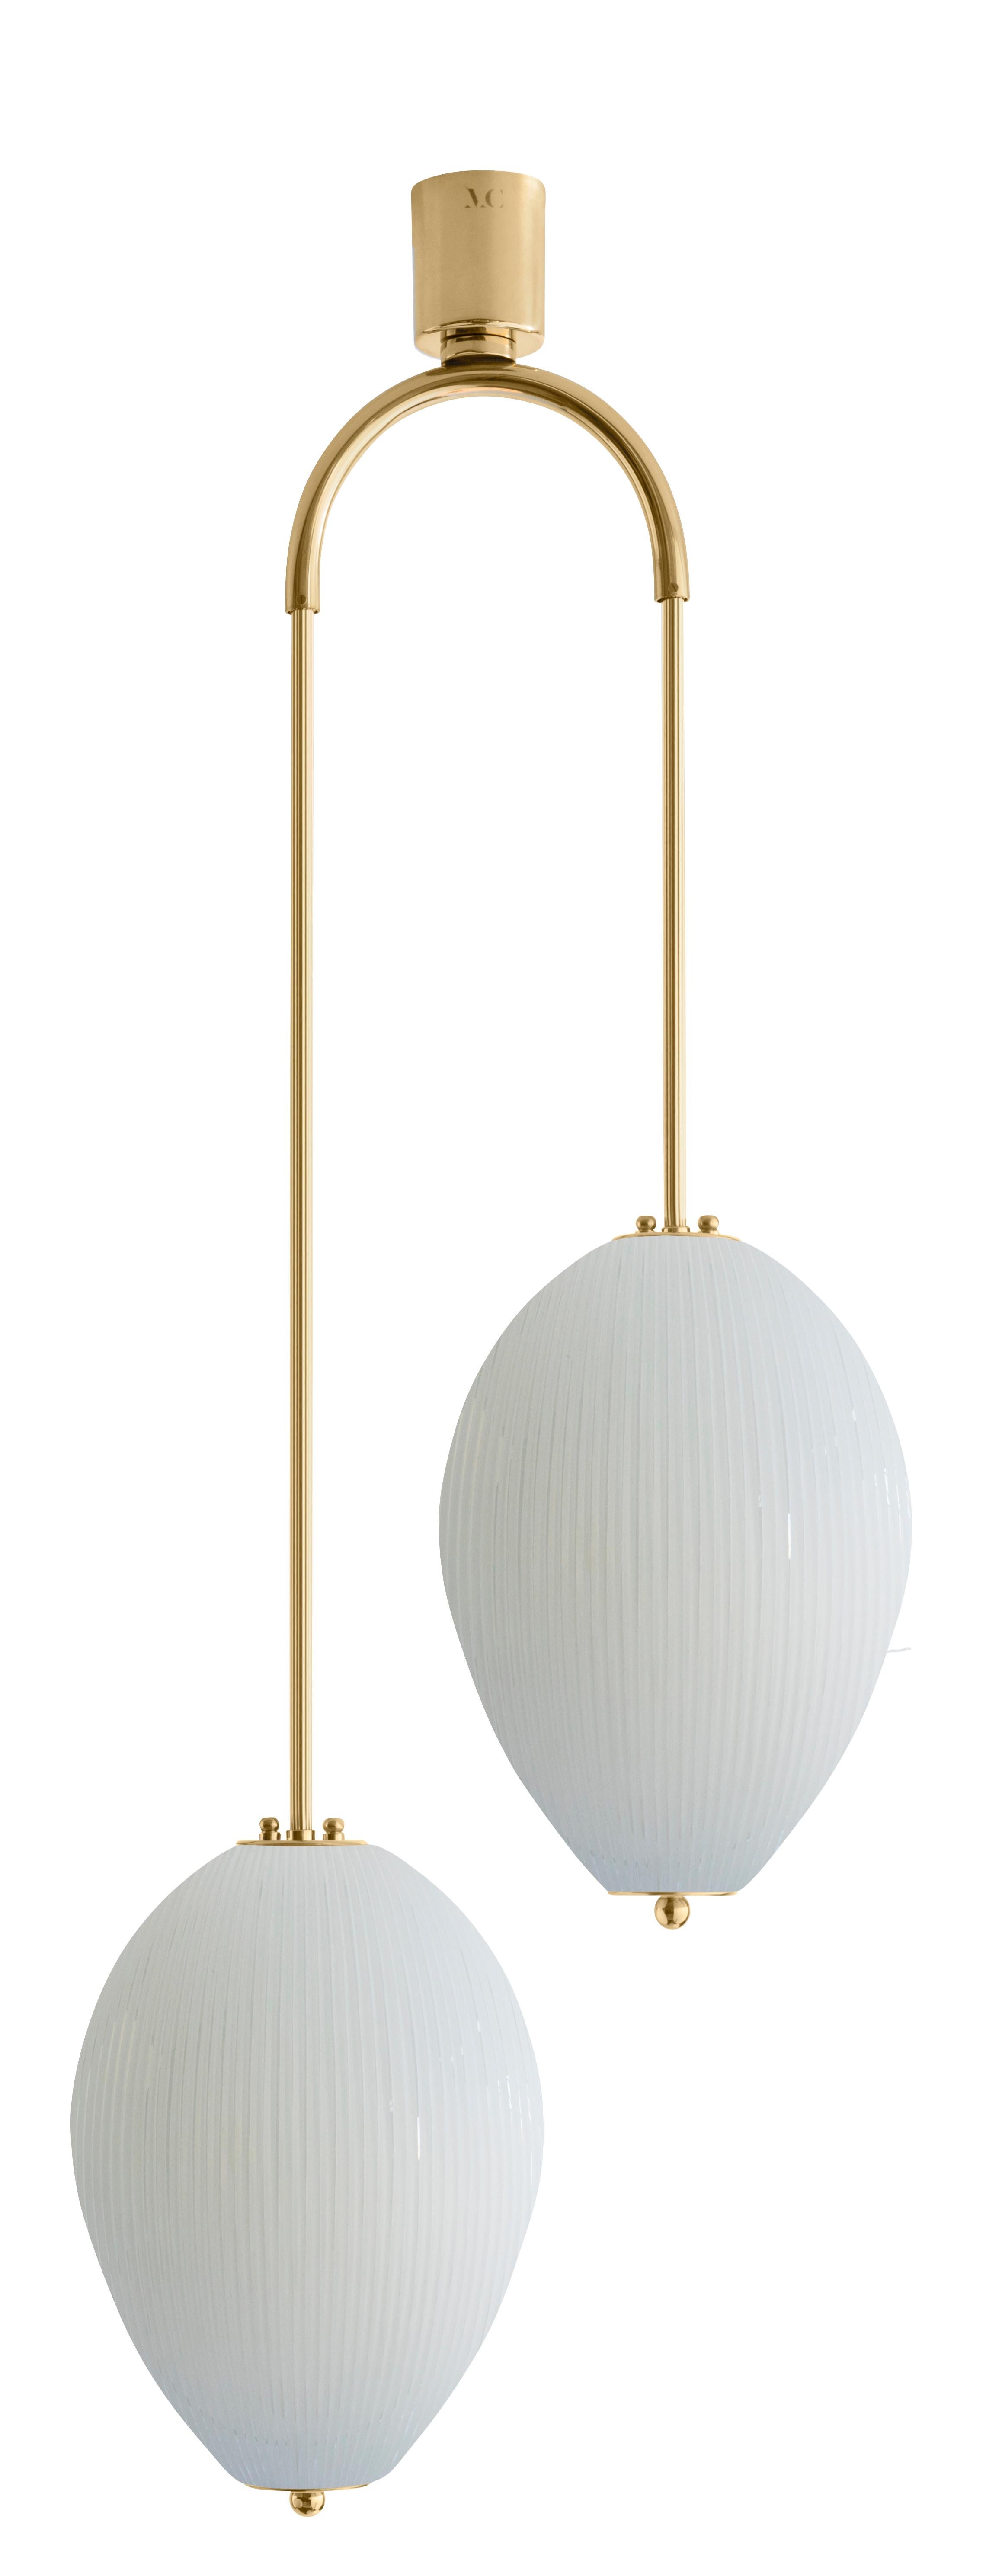 Double chandelier China 10 by Magic Circus Editions
Dimensions: H 121.5 x W 44.3 x D 25.2 cm
Materials: Brass, mouth blown glass sculpted with a diamond saw
Colour: rich grey

Available finishes: Brass, nickel
Available colours: enamel soft